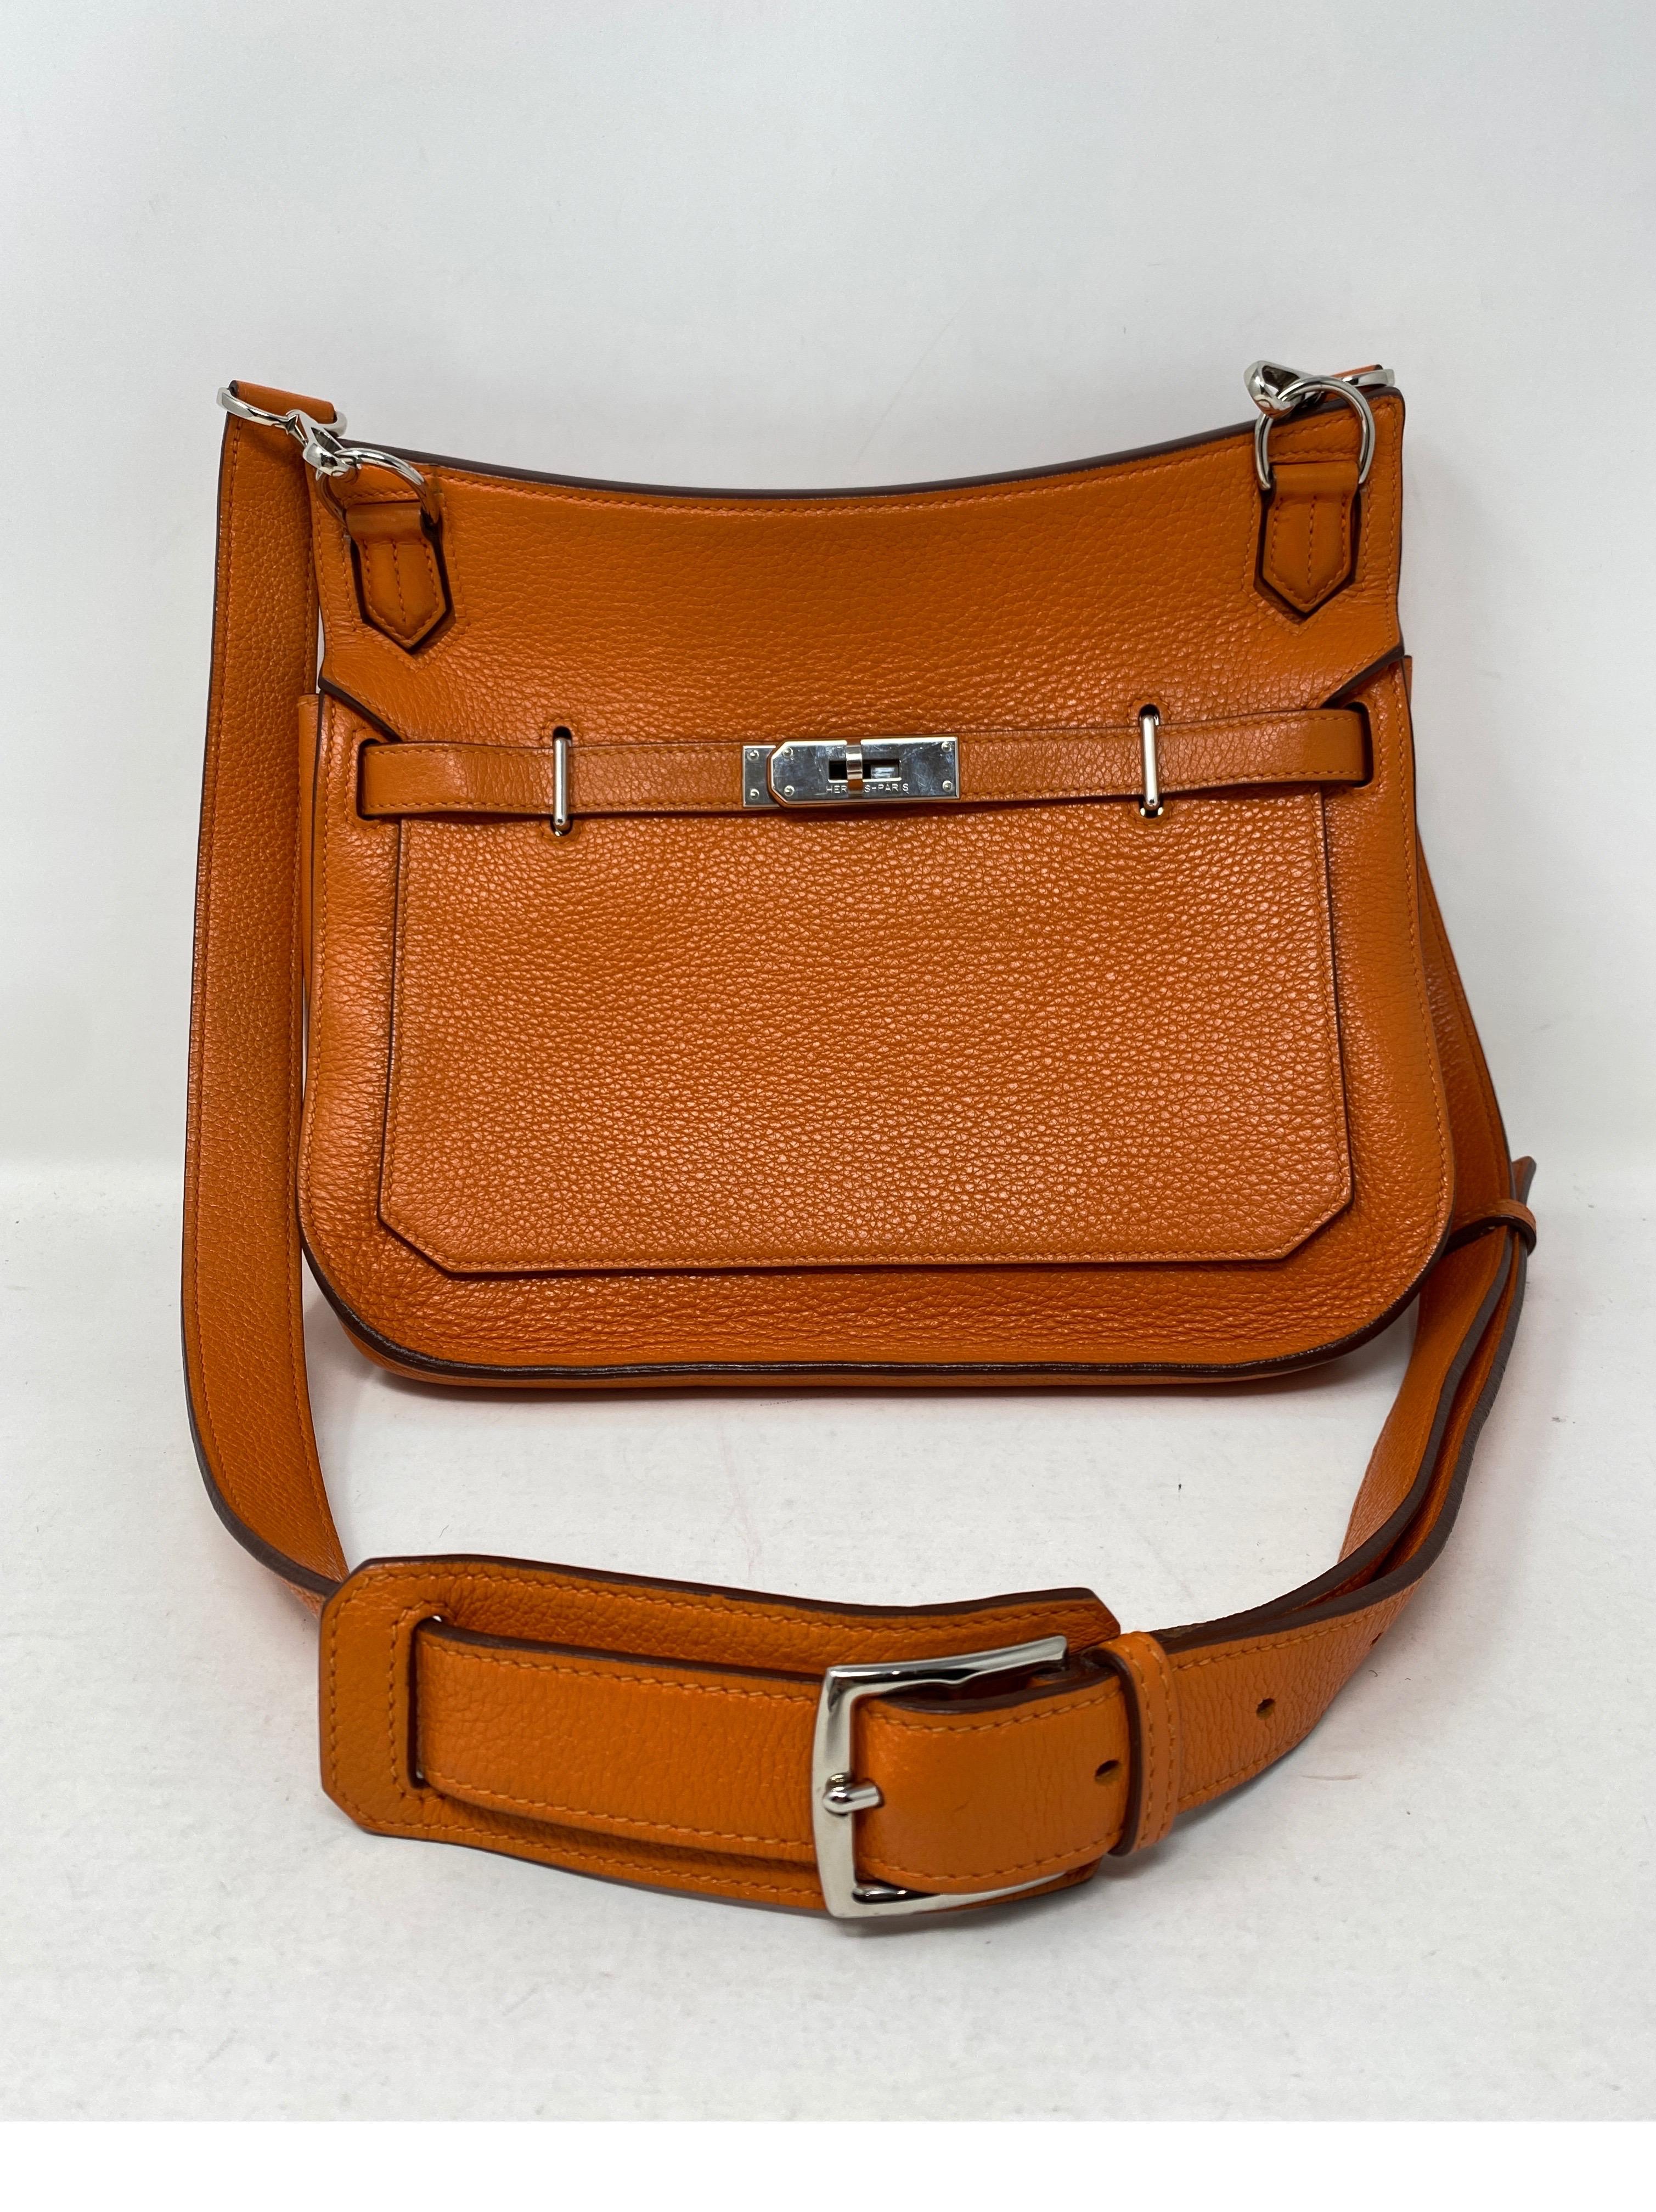 Hermes Jypsiere 28 Orange Crossbody Bag. Palladium hardware. Clemence leather. Good condition. Slight wear where silver handles rest on leather. Just on the straps. Great crossbody bag that has an adjustable strap. Includes dust cover. Guaranteed